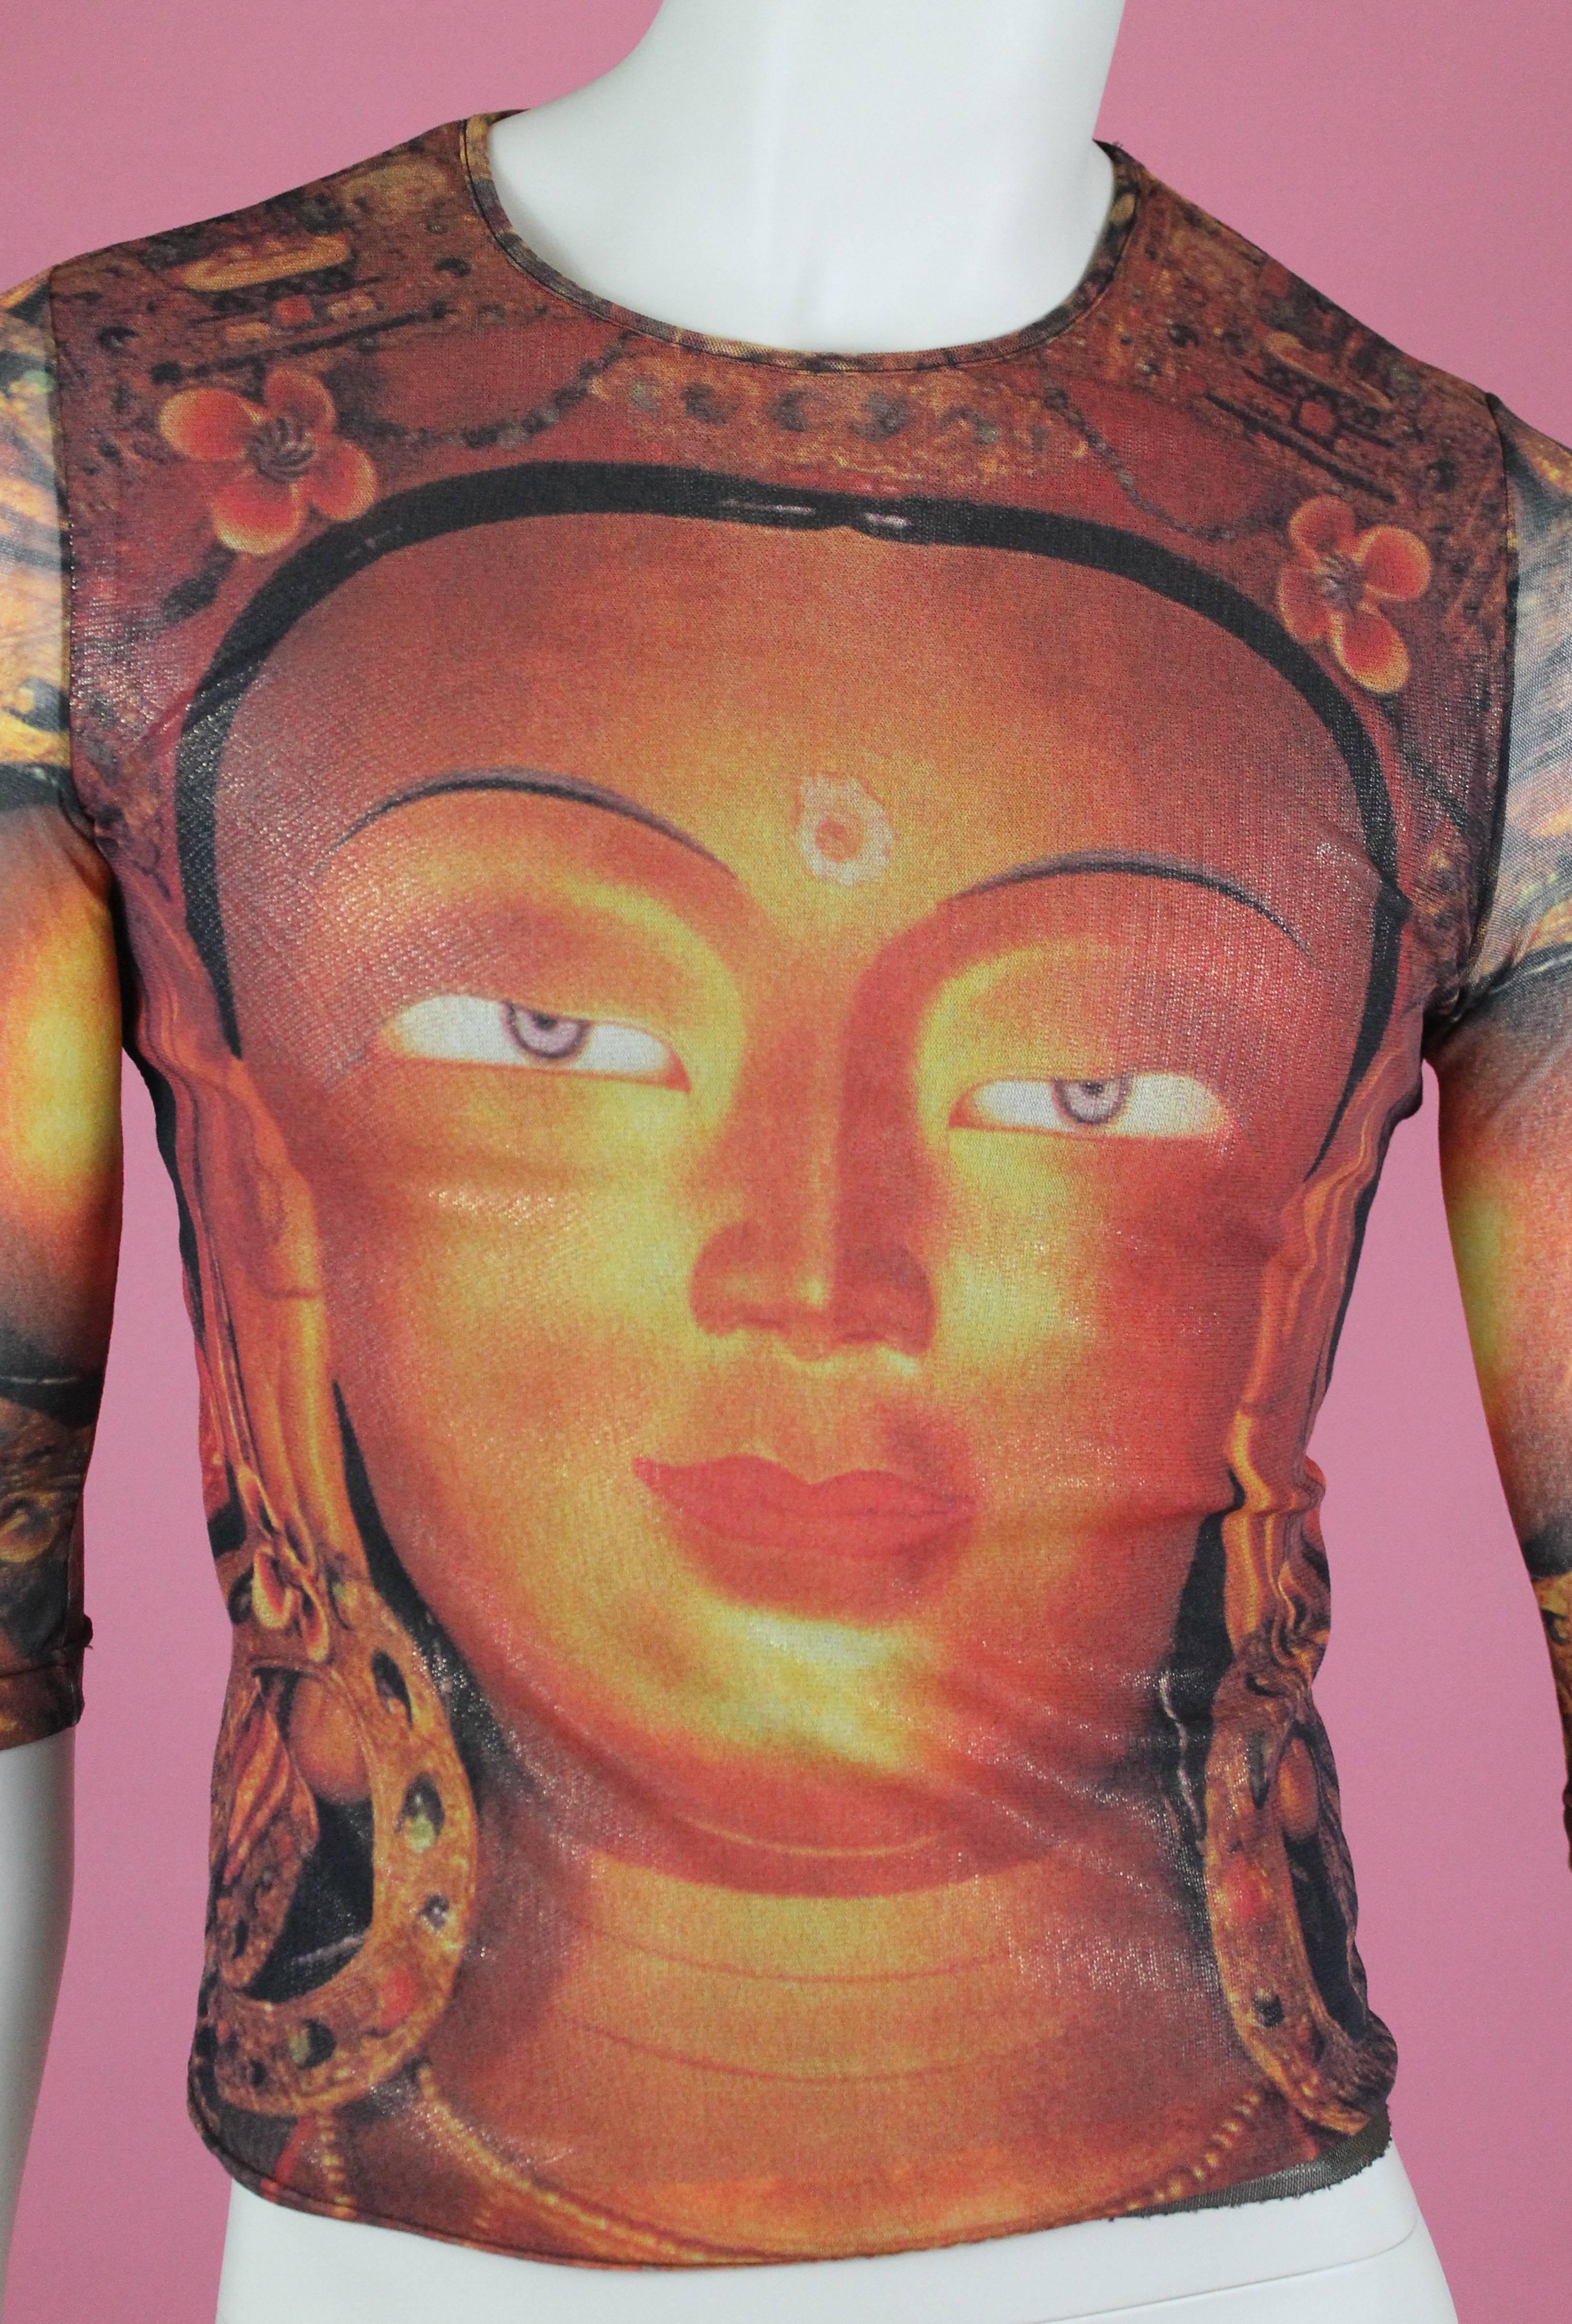 -Totally cool top from Chinese-American designer Vivienne Tam
-Features Buddha on the front as well as the back of shirt
-Top is sheer but has a shimmering lining underneath (sleeves are unlined)
-Unisex item, would be ideal as a muscle tee on